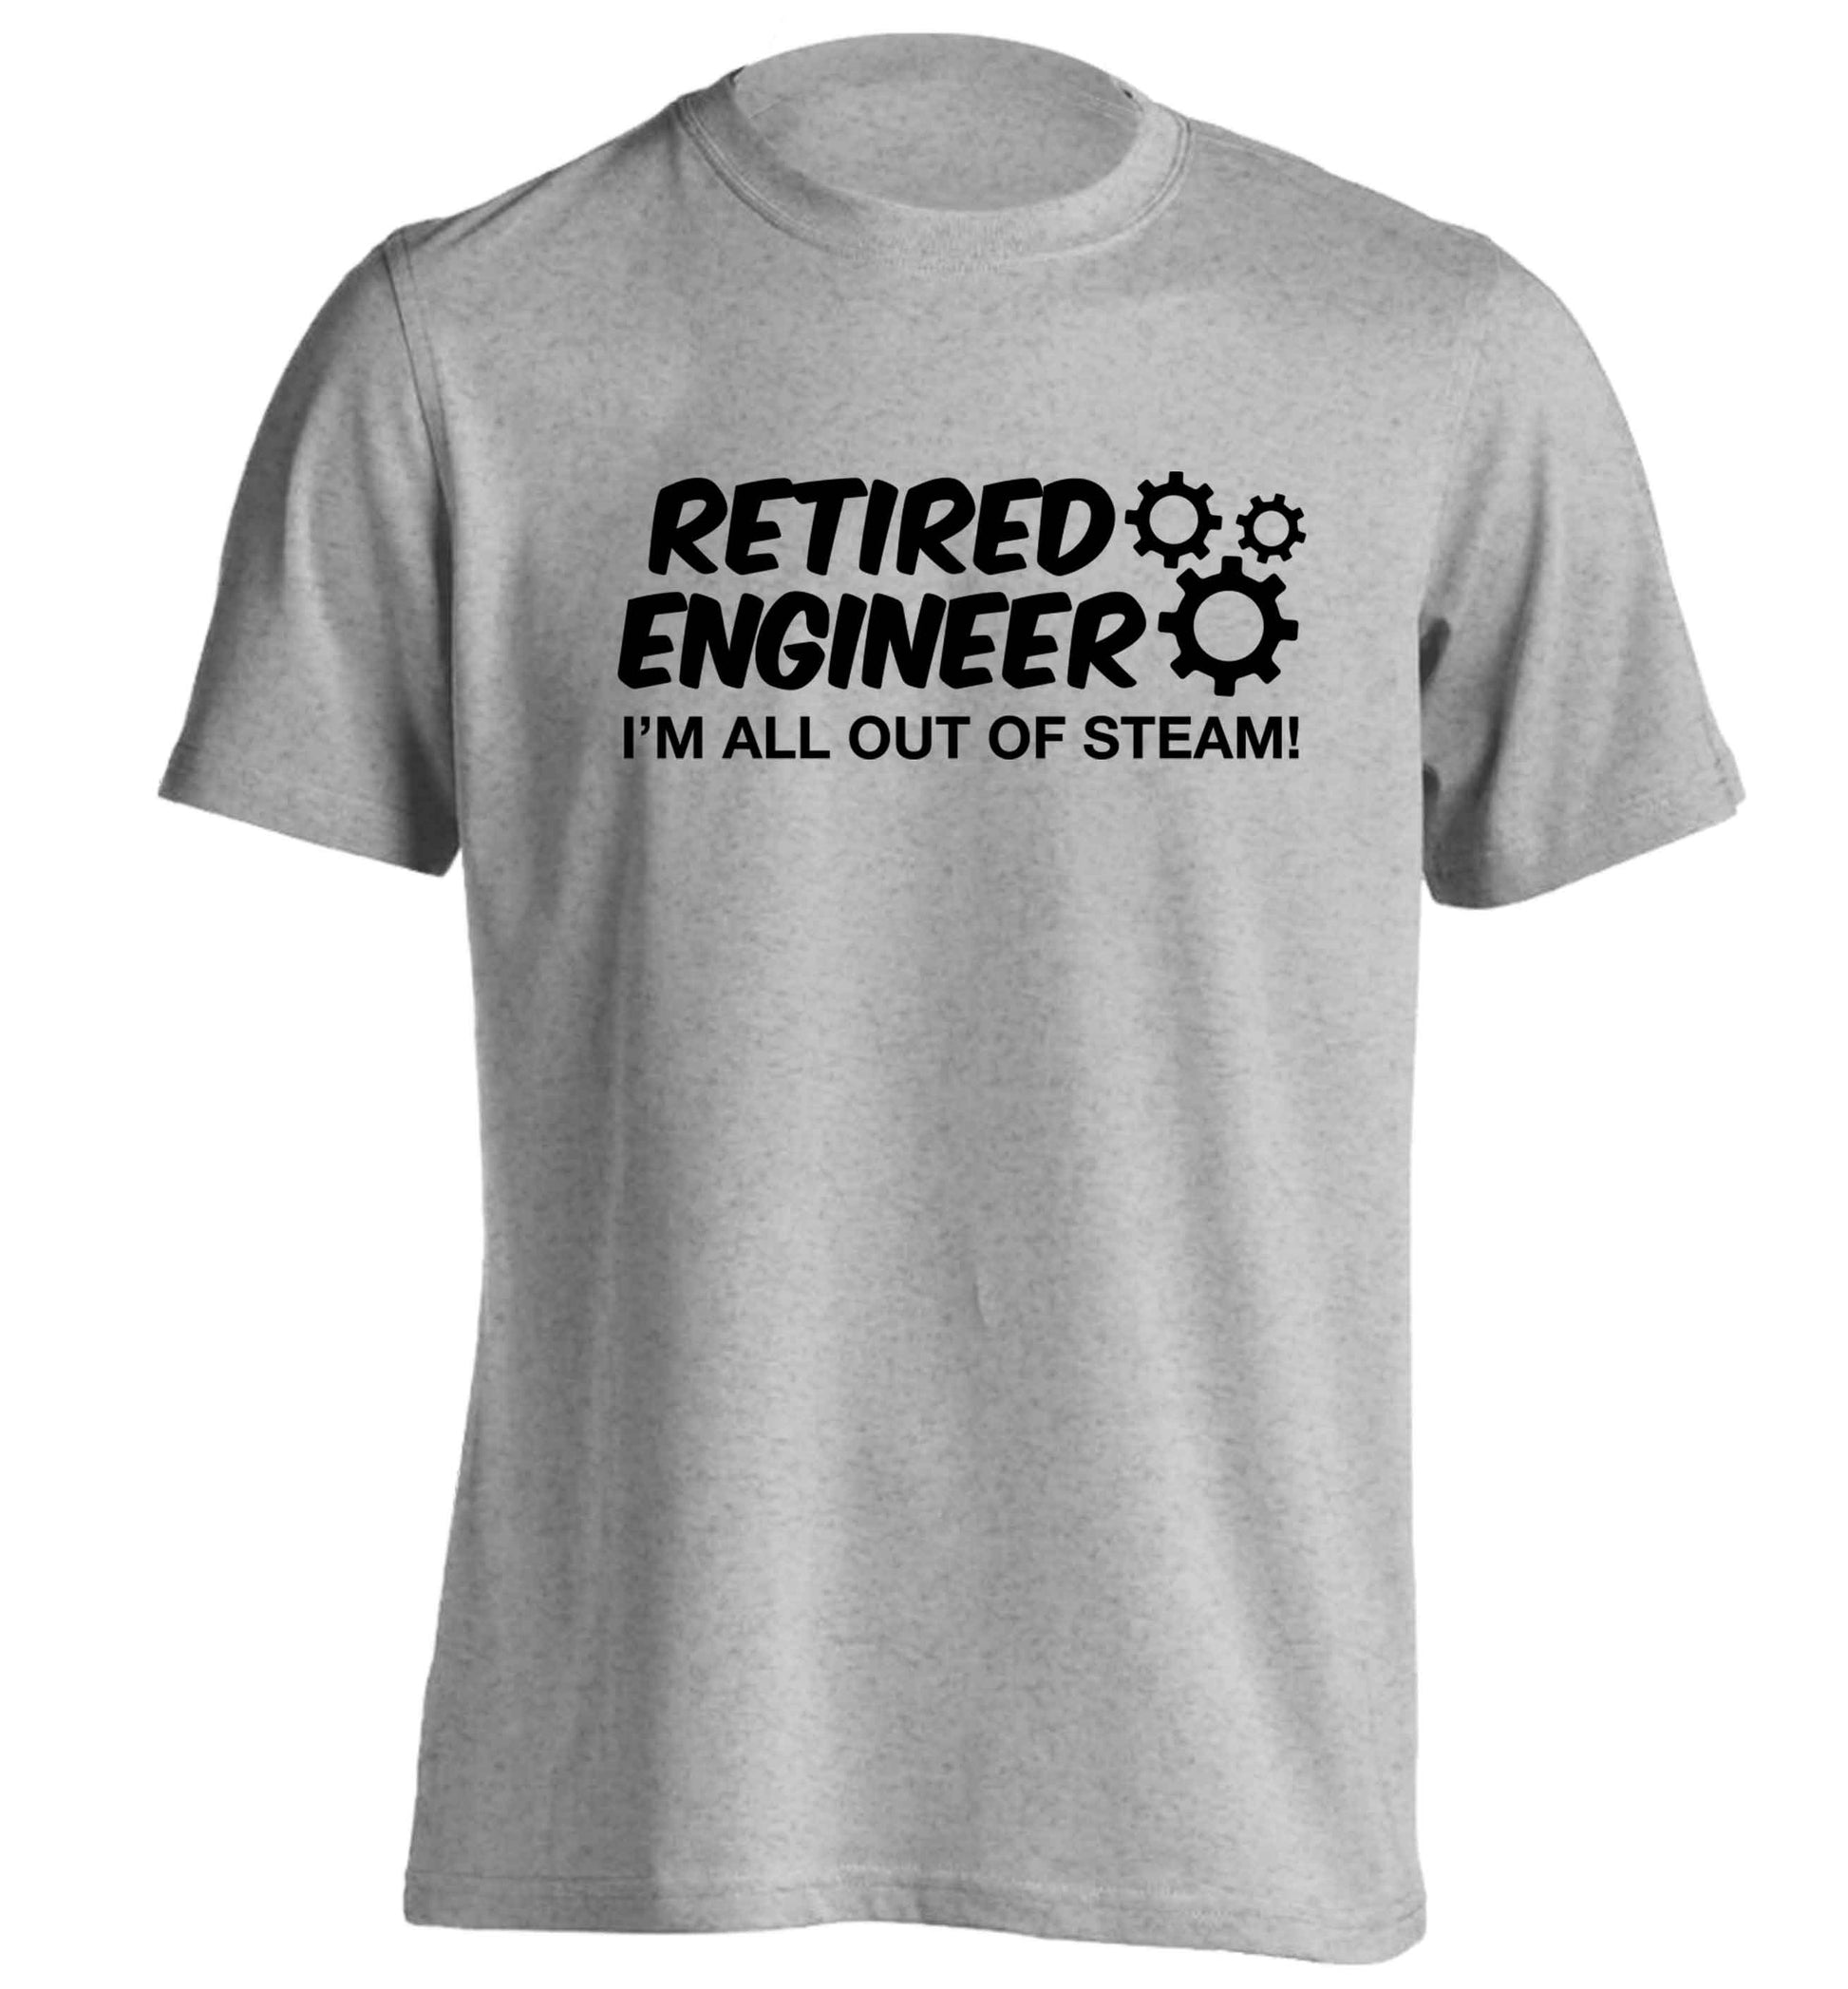 Retired engineer I'm all out of steam adults unisex grey Tshirt 2XL